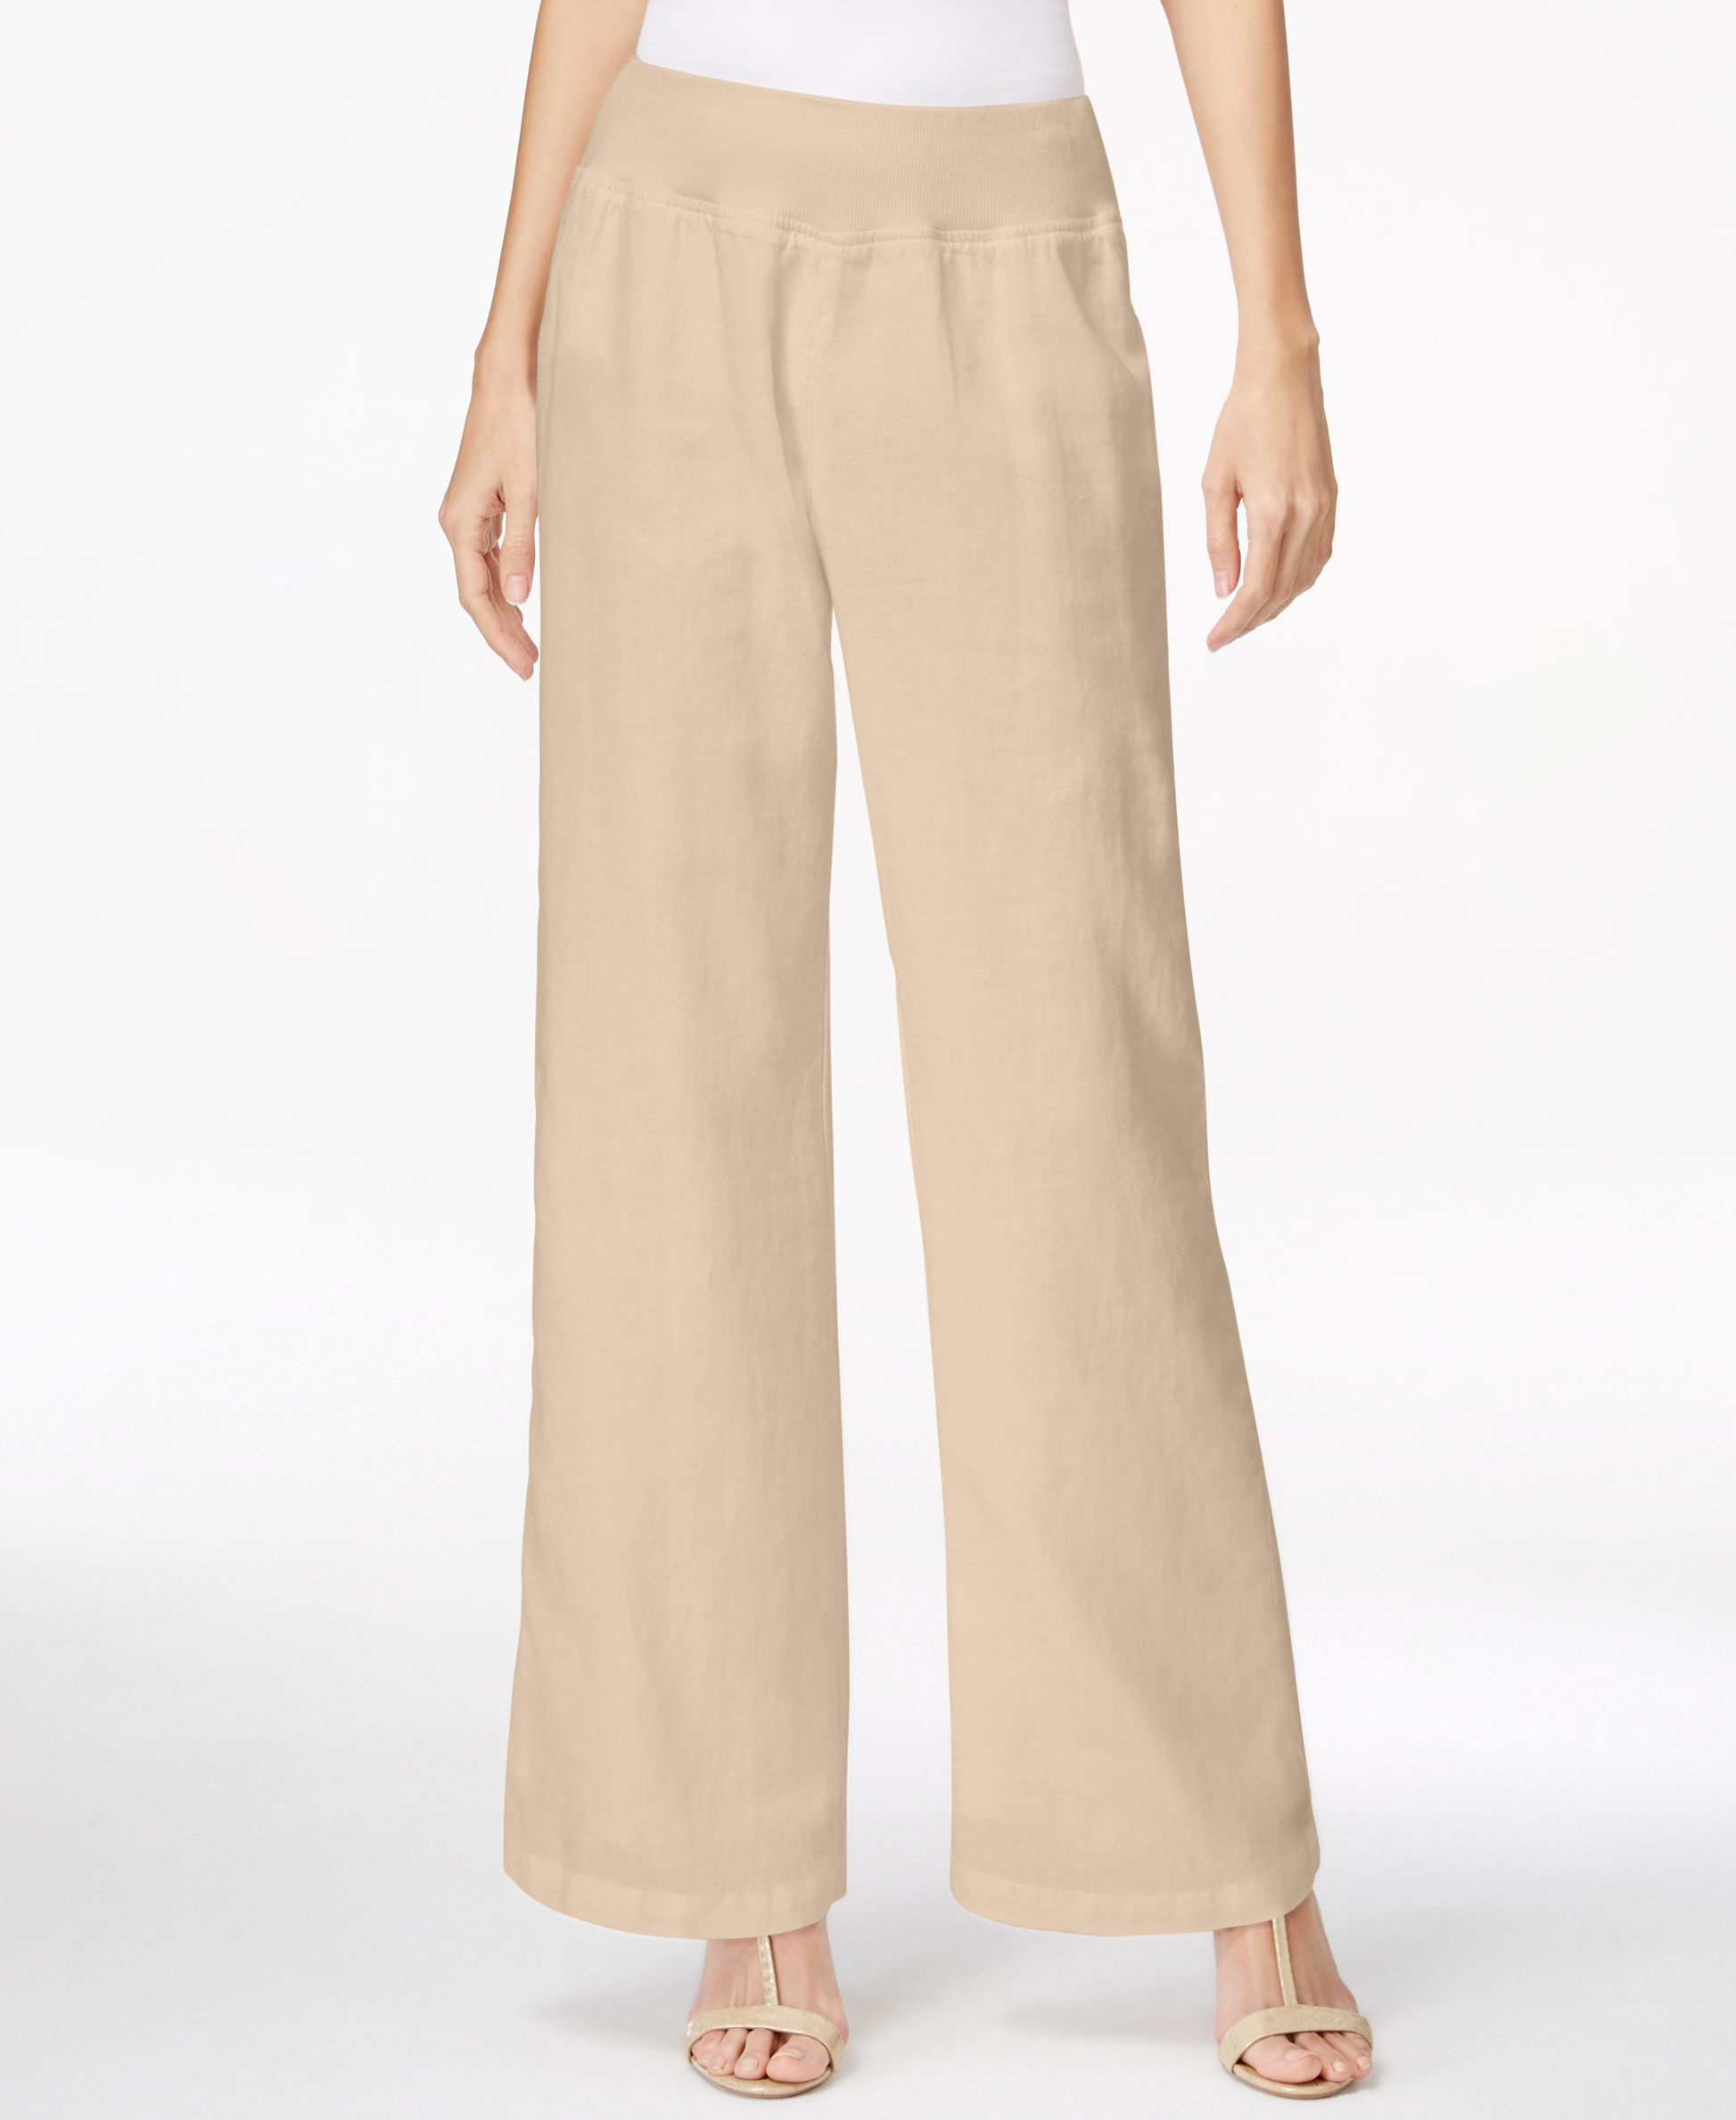 Lyst - Calvin klein Pull-on Wide-leg Linen Pants in Natural